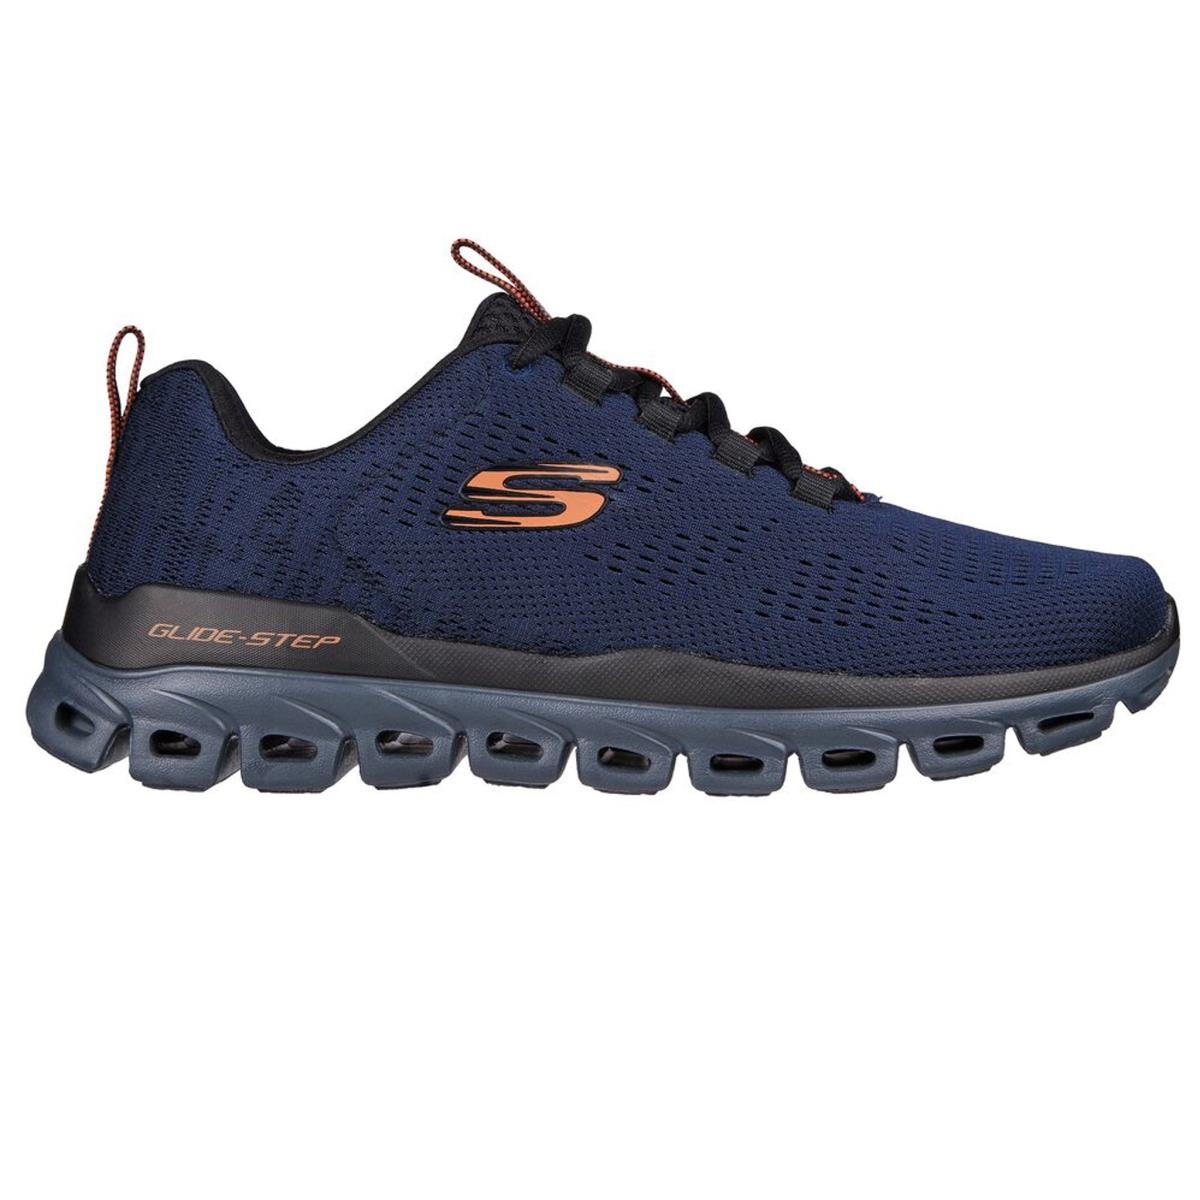 Skechers Men`s 232136 Glide Step Fasten Up Casual Athletic Shoes Navy/Black